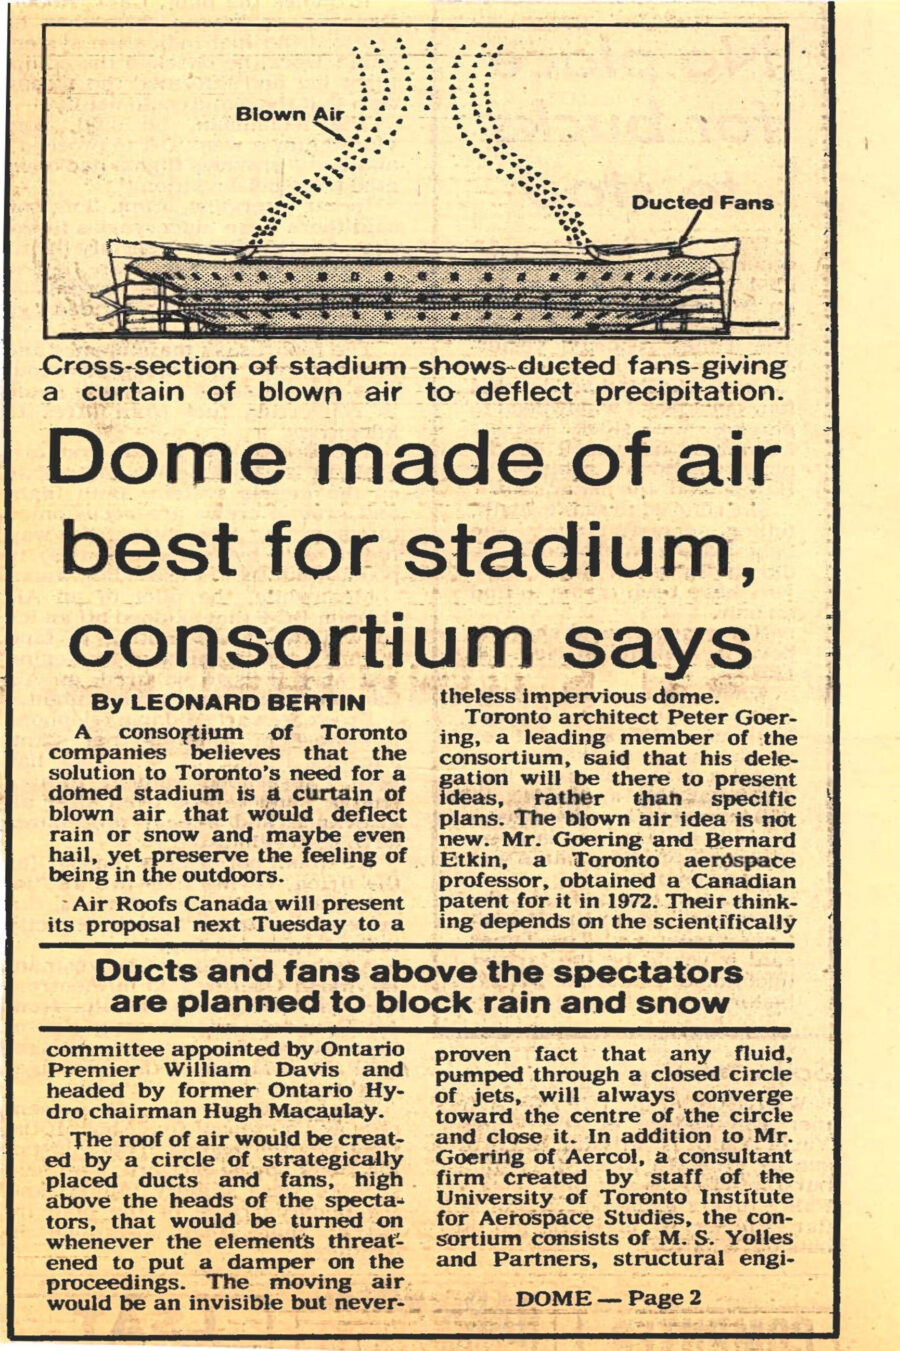 Newspaper clipping from The Toronto Star, September 8, 1981
Headline: Dome made of air best for stadium, consortium says
Byline: Leonard Bertin
Illustration: A drawing of the proposed Toronto stadium, air currents depicted with small arrowheads showing ducted fans forcing blown air to repel currents above the stadium.
Caption: Cross-section of stadium shows ducted fans giving a curtain of blown air to deflect precipitation.
A consortium of Toronto companies believes that the solution to Toronto’s need for a domed stadium is a curtain of blown air that would deflect rain or snow and maybe even hail, yet preserve the feeling of being in the outdoors. Air Roofs Canada will present its proposal next Tuesday to a committee appointed by Ontario Premier William Davis and headed by former Ontario Hydro chairman Hugh Macaulay.
The roof of air would be created by a circle of strategically placed ducts and fans, high above the heads of the spectators, that would be turned on whenever the elements threatened to put a damper on the proceedings. The moving air would be an invisible but nevertheless impervious dome.
Toronto architect Peter Goering will present the idea, rather than a specific plan. Mister Goering and Bernard Etkin, a Toronto aerospace professor, obtained a Canadian patent for it in 1972. Their thinking depends on the scientifically proven fact that any fluid, pumped through a closed circle of jets, will always converge toward the centre of the circle and close it.
Tests conducted at the University of Toronto institute first sought to prove the idea on a very small scale with a circle 2½ centimetres in diameter. Then they moved to 1 metre and finally to an “arena” 6 metres in diameter. All of the models worked according to theory and even hose pipe jets were deflected while spectators remained dry underneath.
A.A. Haasz, another aerospace professor, believes that increasing the size further is merely a matter of scaling up the energy in the system and choosing the right designs of ducts and fans. The next step, a test bed 25 metres in diameter, could cost $2 million, but a Japanese company has shown some interest in financing the project. The Ontario Government is sending a company delegation to Japan early in November for further discussion.
Although a full-size air-dome for Toronto would require about 30,000 horsepower, or about 50 percent more than that produced by a large by-pass fan aircraft jet engine, Professor Haasz said that the wind velocities produced would be much lower and should present no noise problem. Because they would be driven electrically, there would be none of the smell of kerosene that pervades large airfields.
Another party that has shown interest in the concept is the All England Lawn Tennis and Croquet Club at Wimbledon, best-known tennis venue in the world. Misteral Goering points out that there are 15 people on 24-hour call at Wimbledon and 25 at Lords, London’s mecca of cricket, whose main duty is to rush out and protect the turf with tarpaulins any time there is a risk of rain or snow.
Mister Goering said dome stadiums are anathema to traditional outdoor games such as baseball, football and soccer, that robs them of much of the atmosphere that draws spectators. “The moment you close the roof,” he says, “you create a sort of indoor circus atmosphere which may be alright at Christmas time for the kids, but is no place for a Grey Cup day or a major baseball game.”
Stadiums that need to be opened and closed by mechanical roofing devices present very special engineering problems. Some run on radial tracks like segments of a skinned orange, converging at the centre; others try to emulate the rotating iris diaphragm that is used to stop down camera lenses. All are inordinately expensive and hard to maintain. The safety of many such proposals has been questioned.
Mister Goering questions, for example, whether safety authorities will permit spectators to stay tightly packed below such a huge mechanical roof of plastic, metal or glass while sections are being rolled into place, to cope with some sudden change in the weather. By contrast, spectators would hardly be aware of the activation of an air roof.